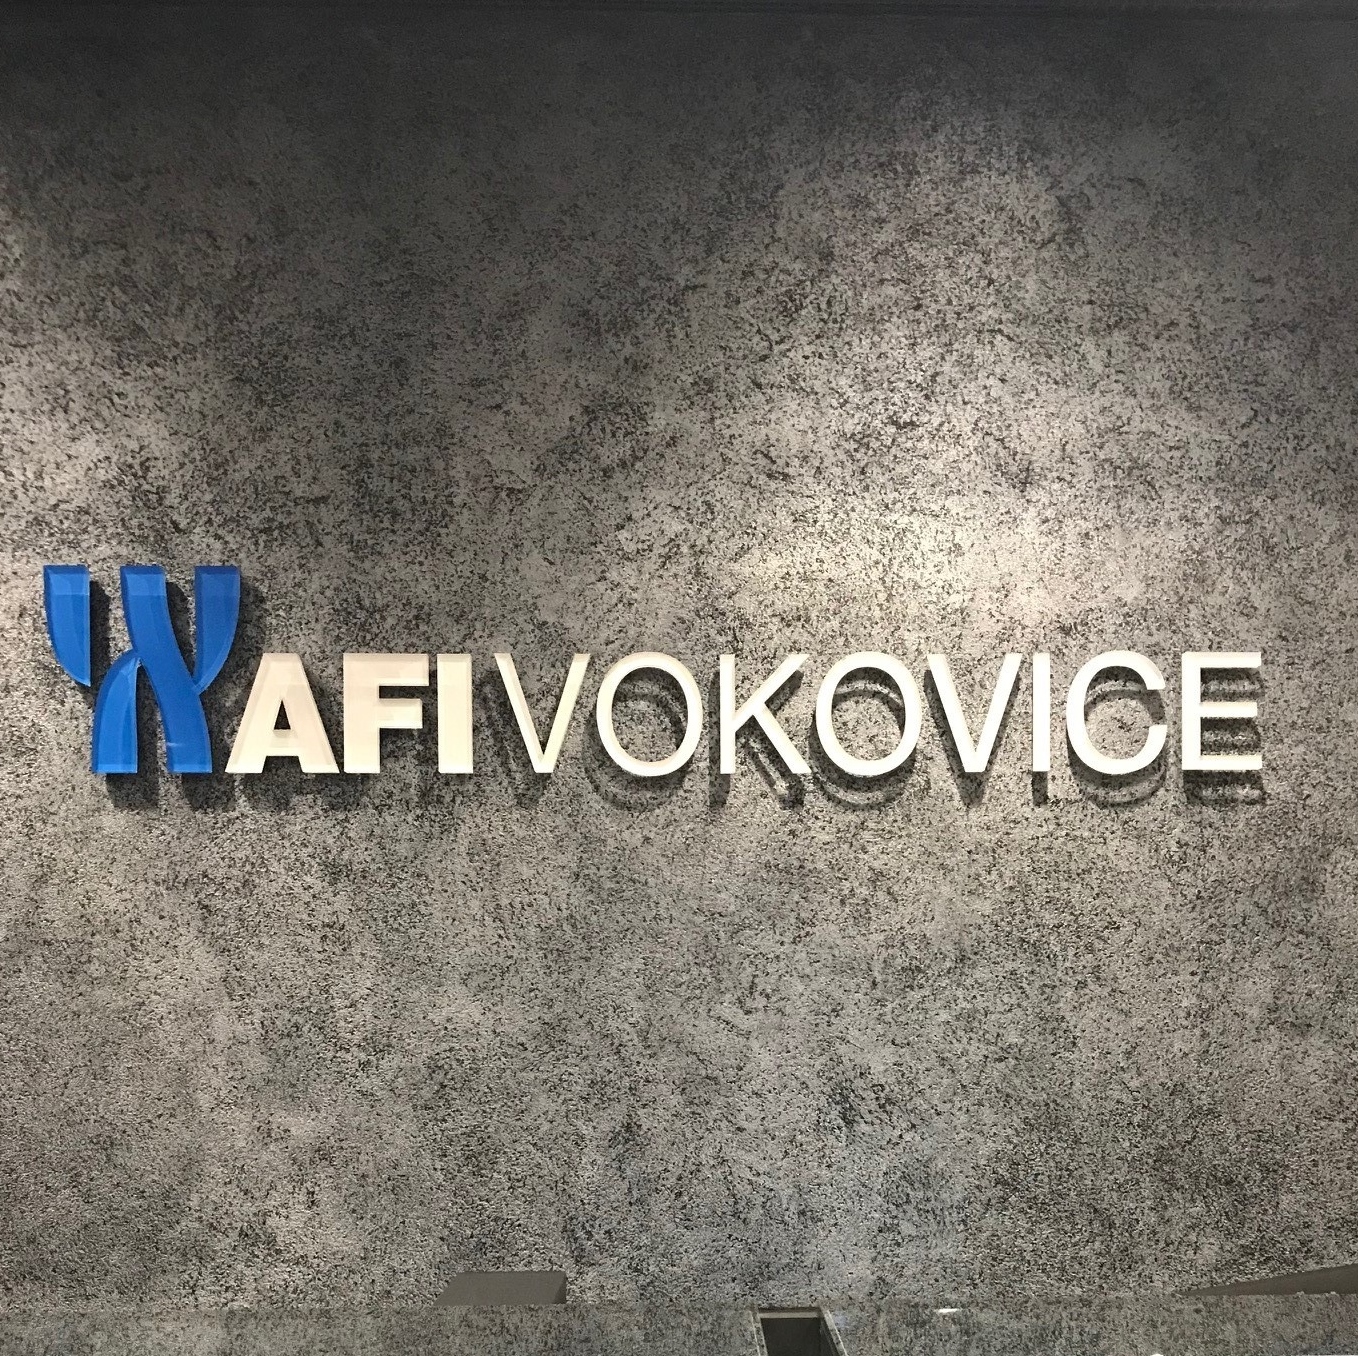 AFI Vokovice has opened to its tenants